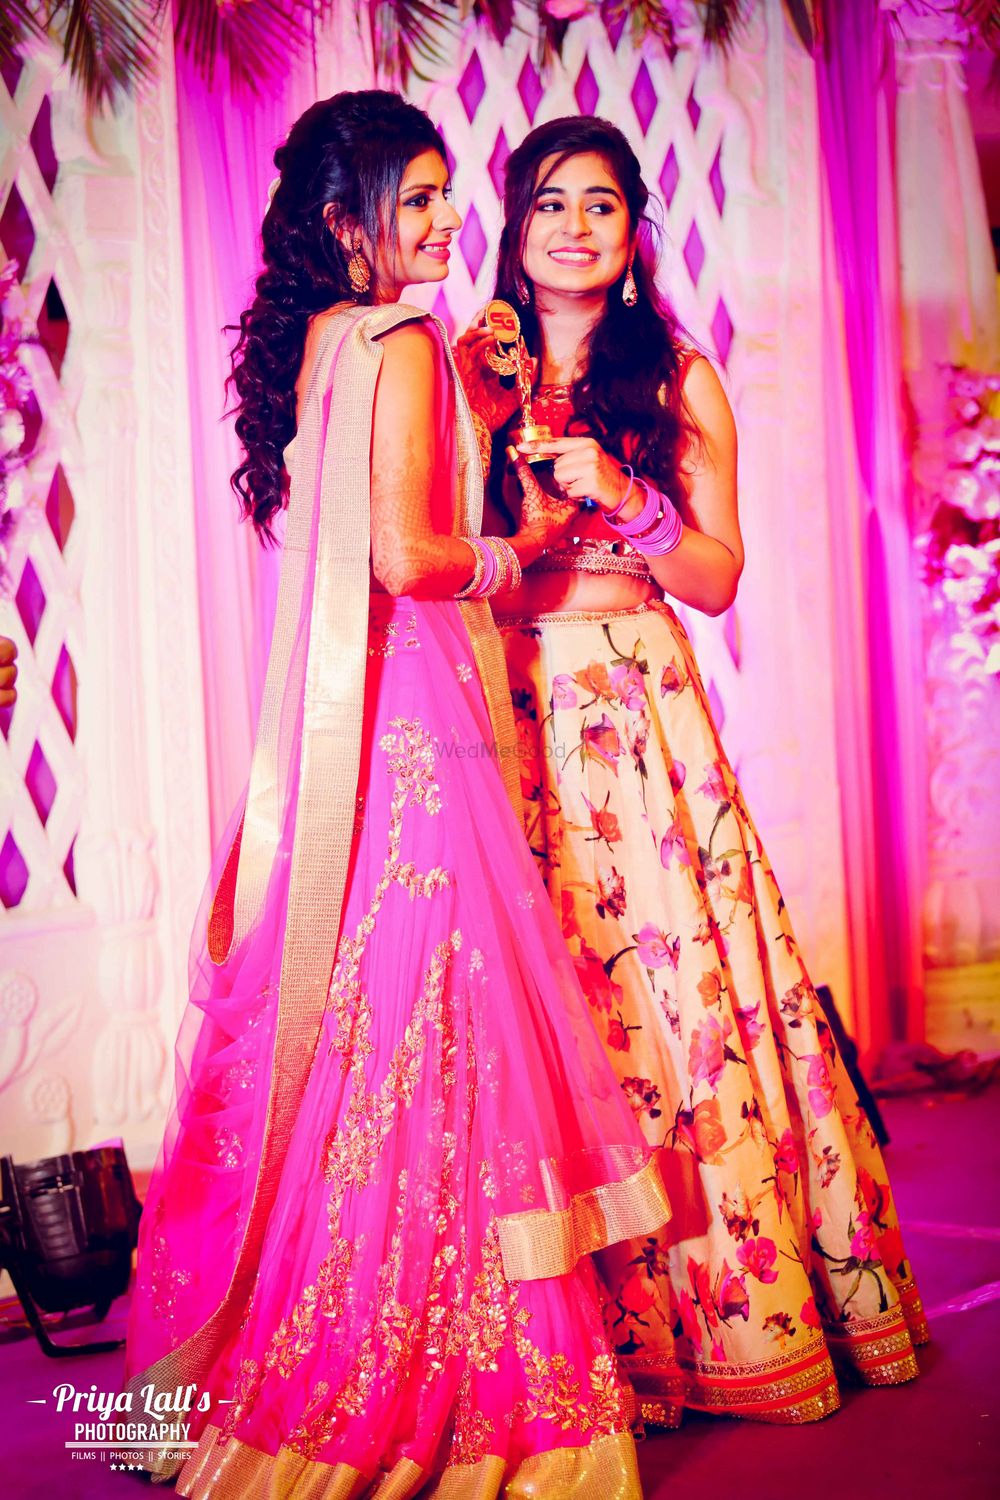 Photo of Bright pink and light pink floral lehengas